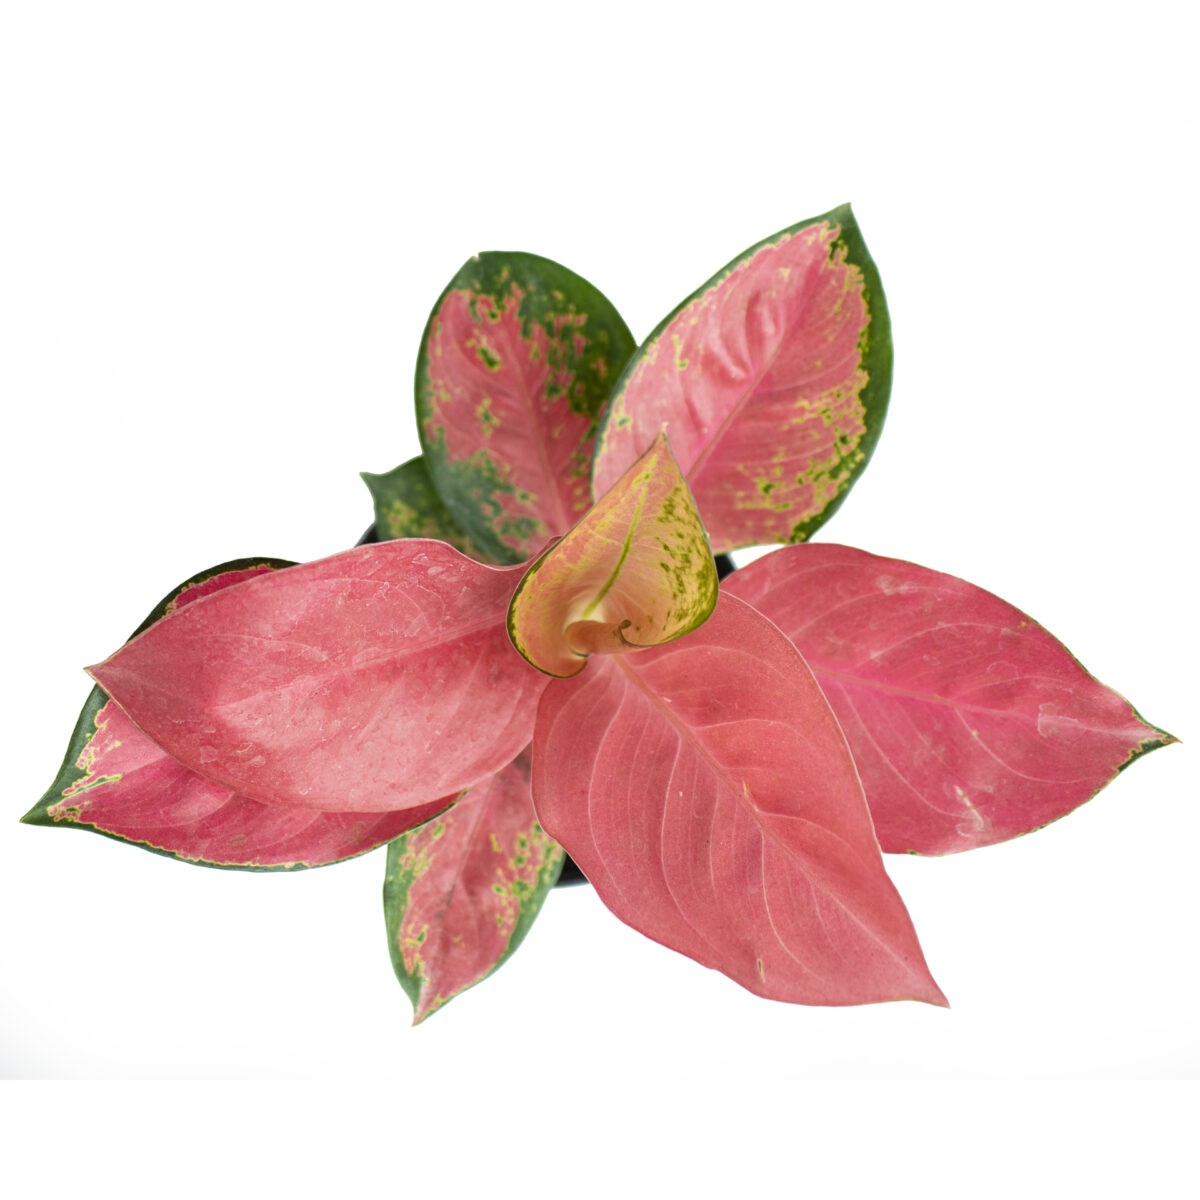 Aglaonema ‘Suksom Jaipong’ indoor plant for office desk plant or table top plant from the top rare indoor plant nursery